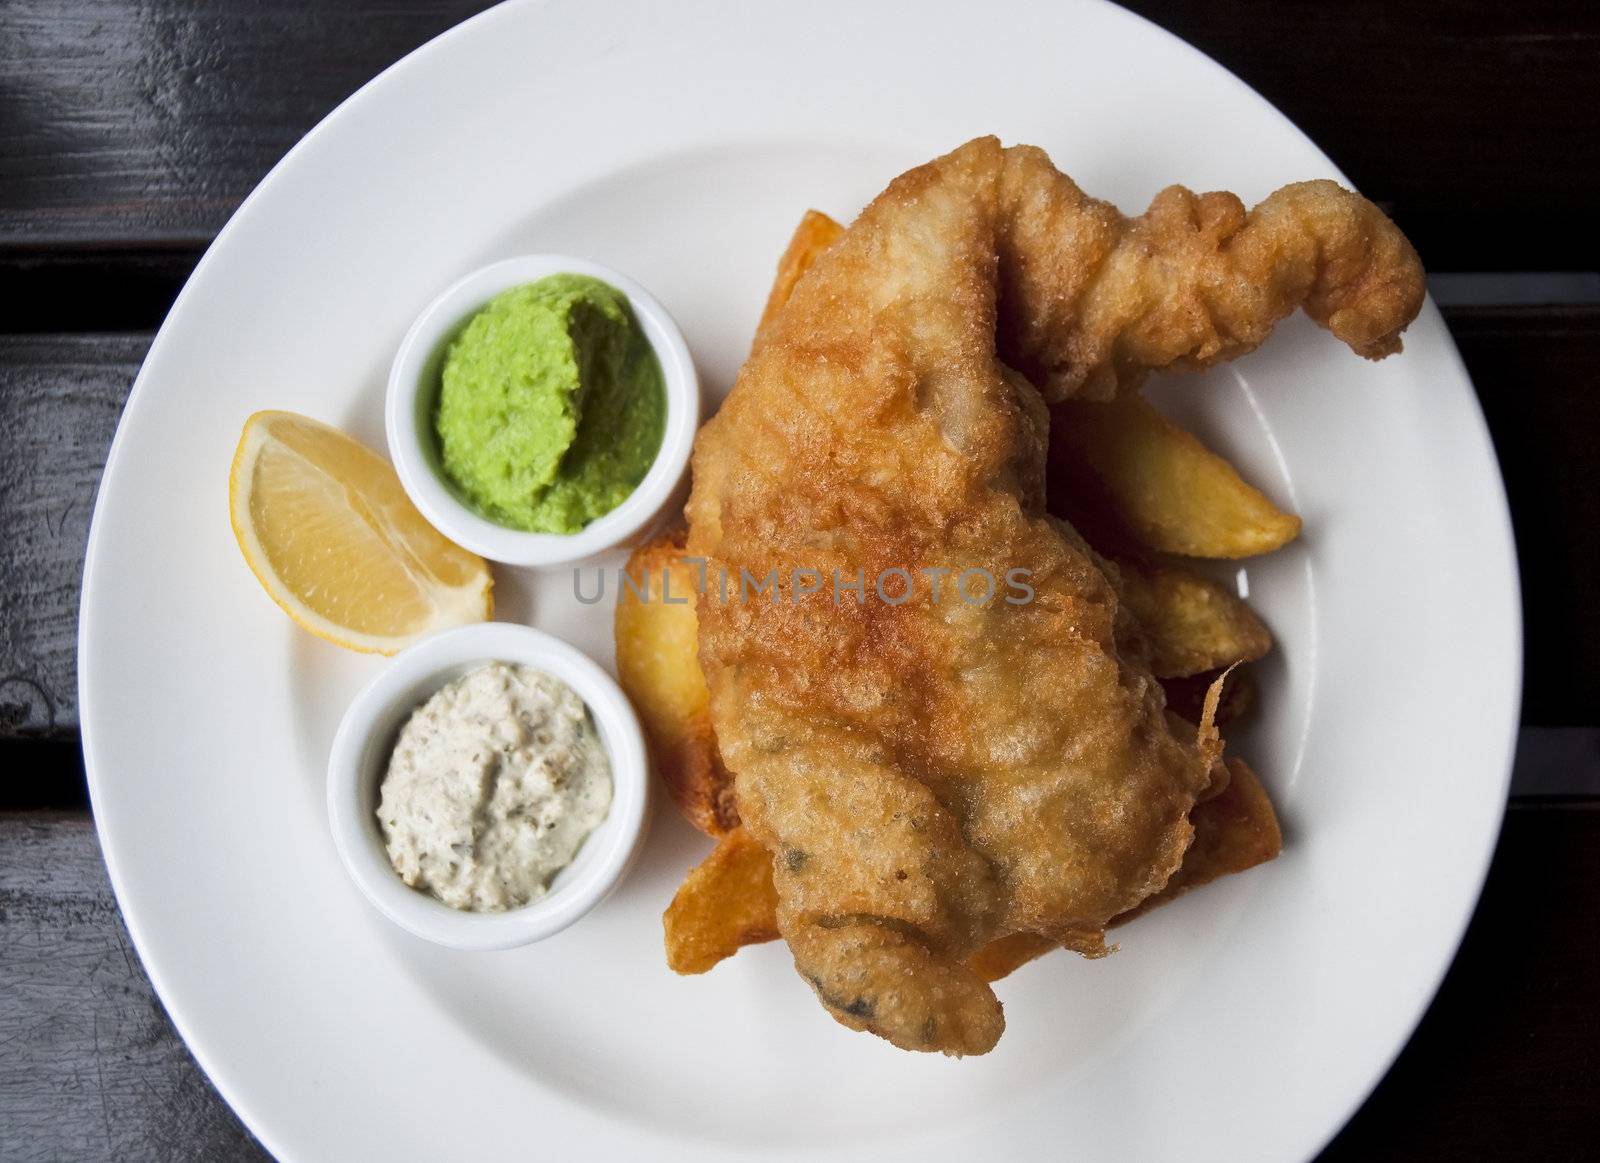 British pub food: fish and chips served with mushy peas and tartare sauce